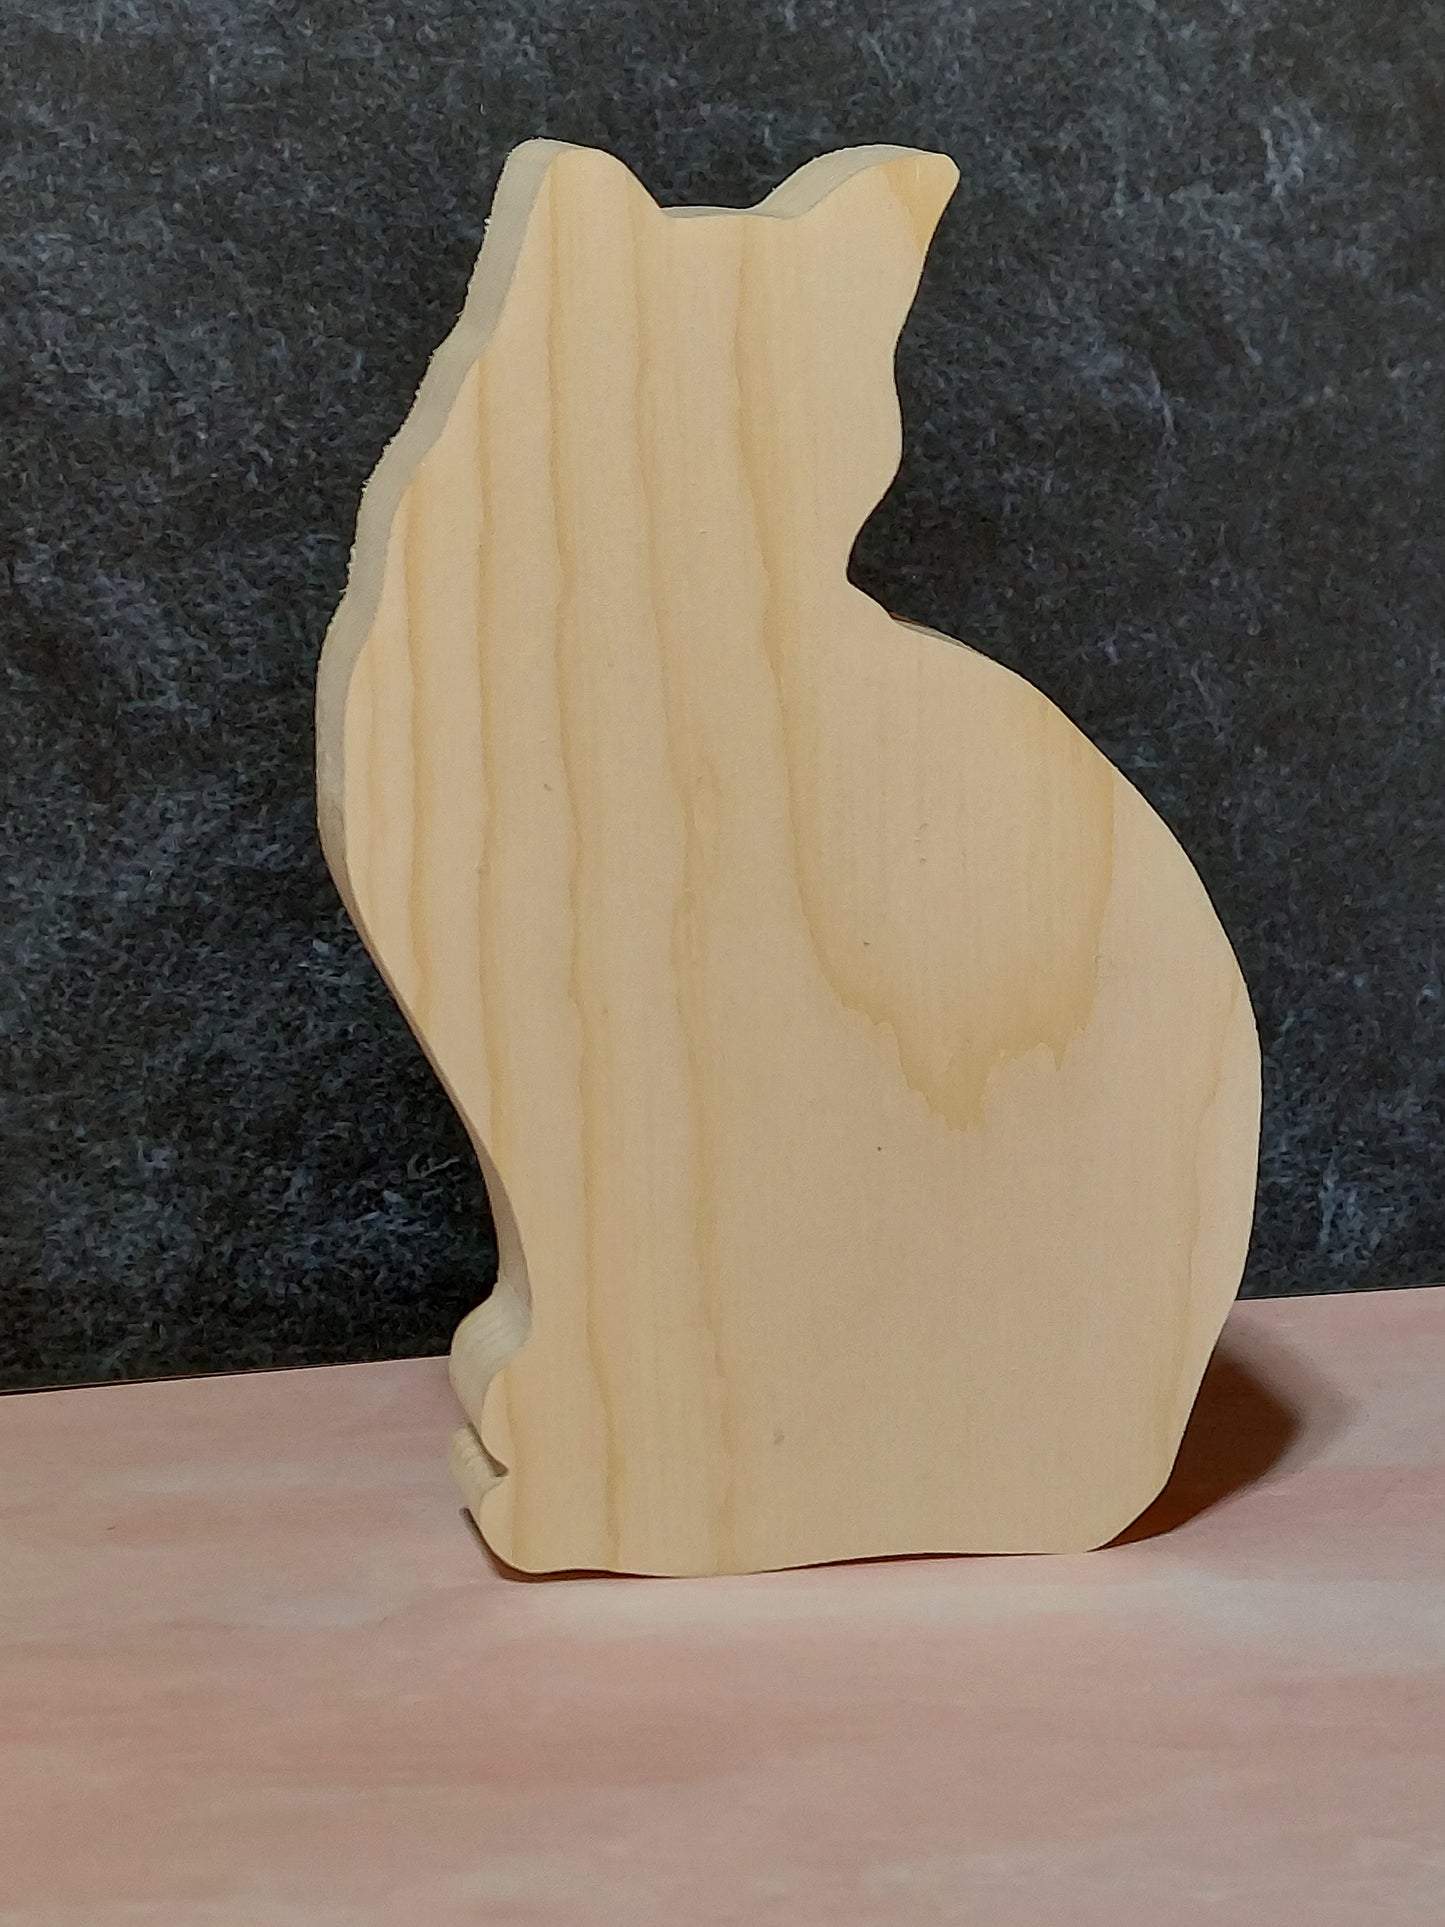 Unfinished Wooden Cat Cutout